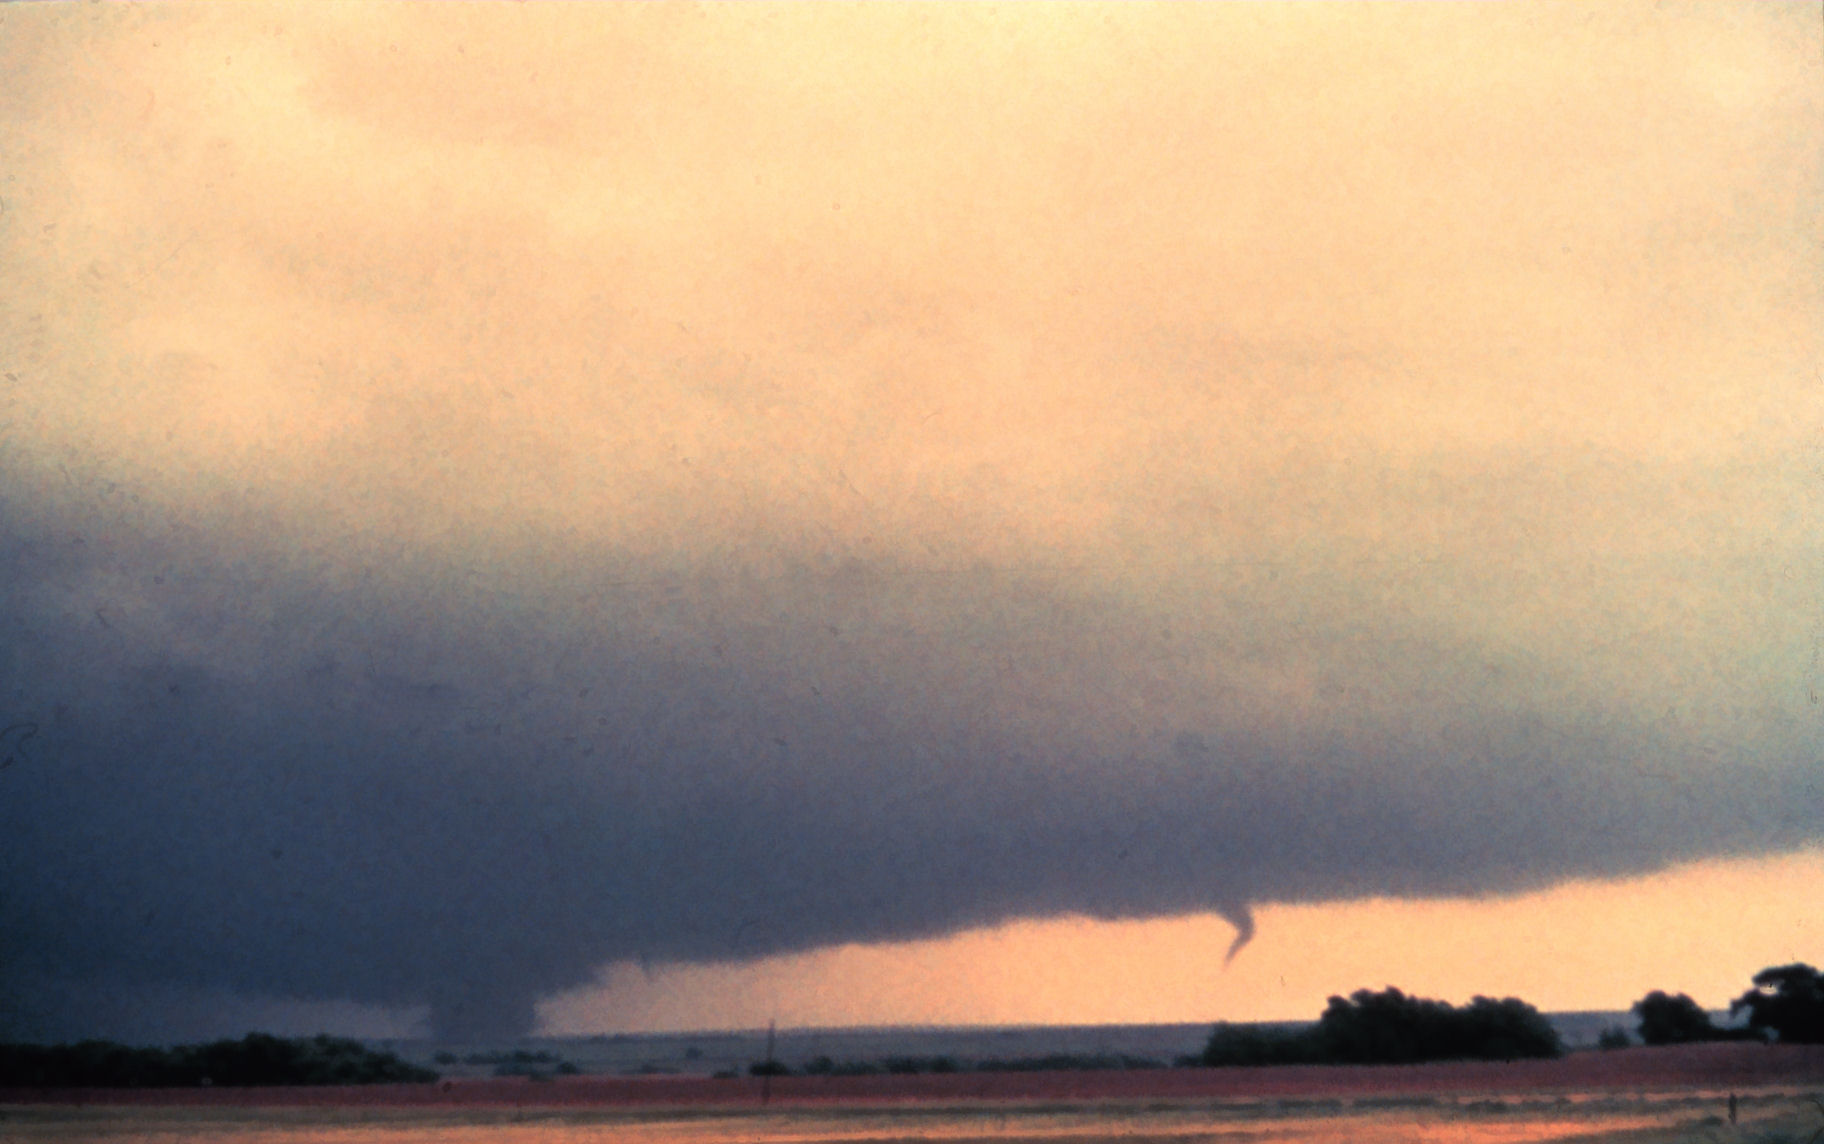 Two tornadoes on the ground southwest of Cheyenne, Oklahoma on May 16, 1977.